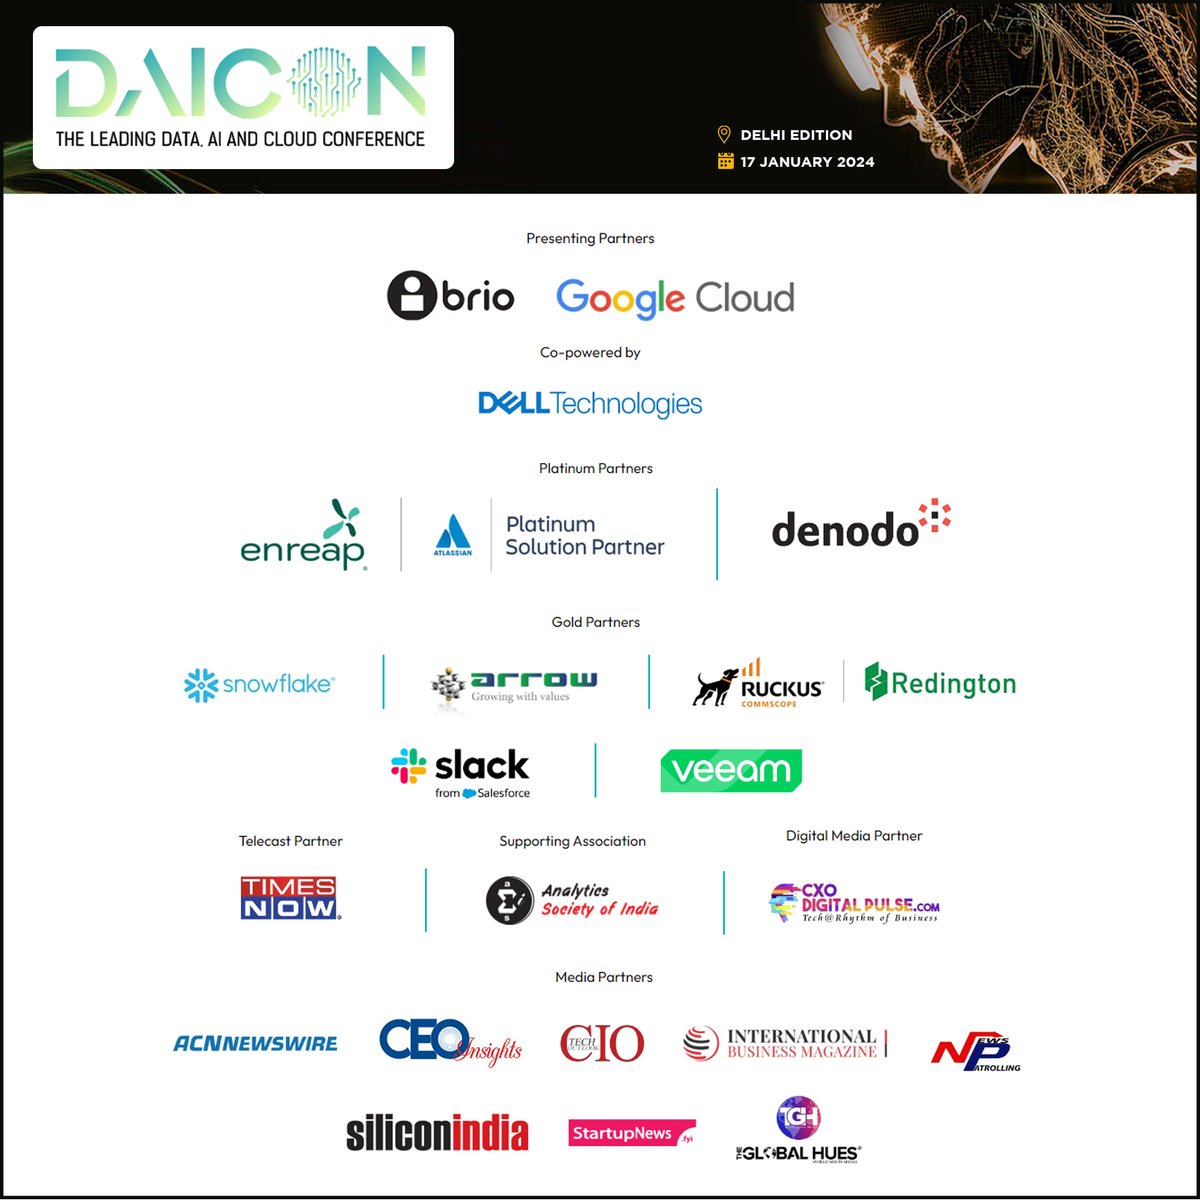 Gratitude Spotlight! A heartfelt thank you to our incredible sponsor partners and media partners DAICON - Delhi Chapter drew over 300+ attendees and featured insights from 60+ distinguished speakers, spanning over 700+ minutes of knowledge dissemination #strDAICON #StrategINK